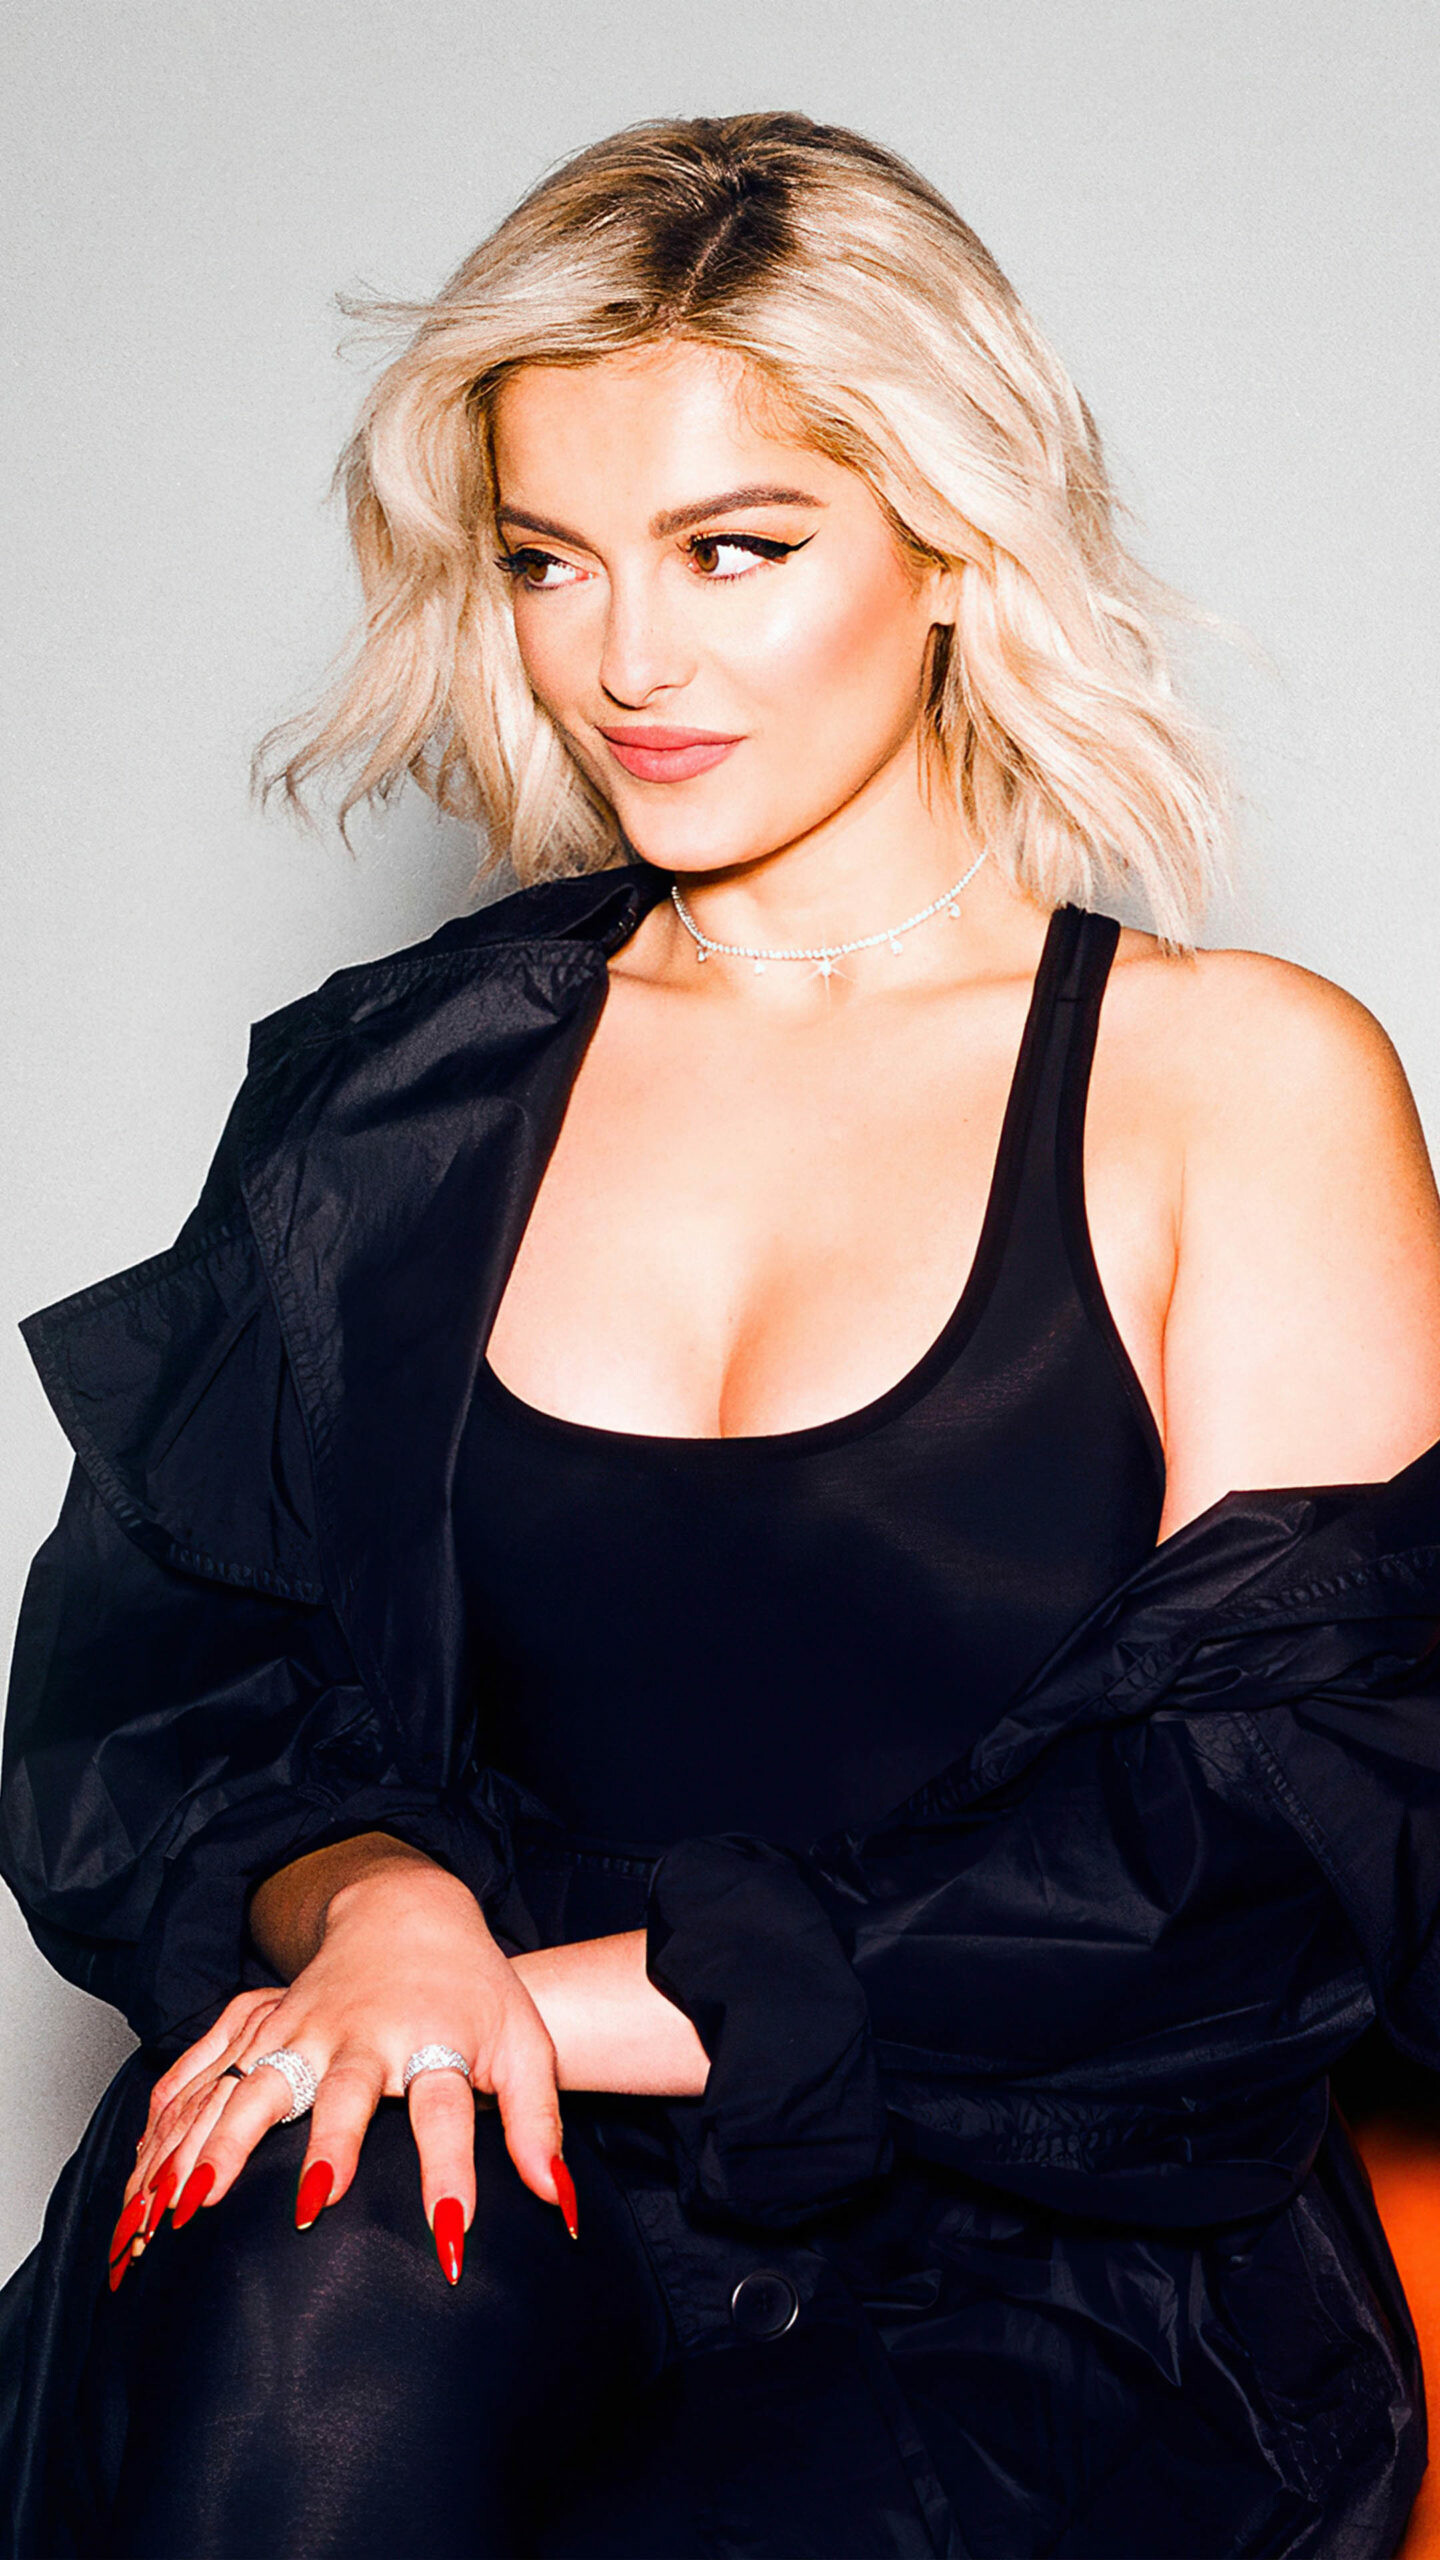 Bebe Rexha: She became a member and a lead vocalist of experimental project called Black Cards in 2010. 1440x2560 HD Background.